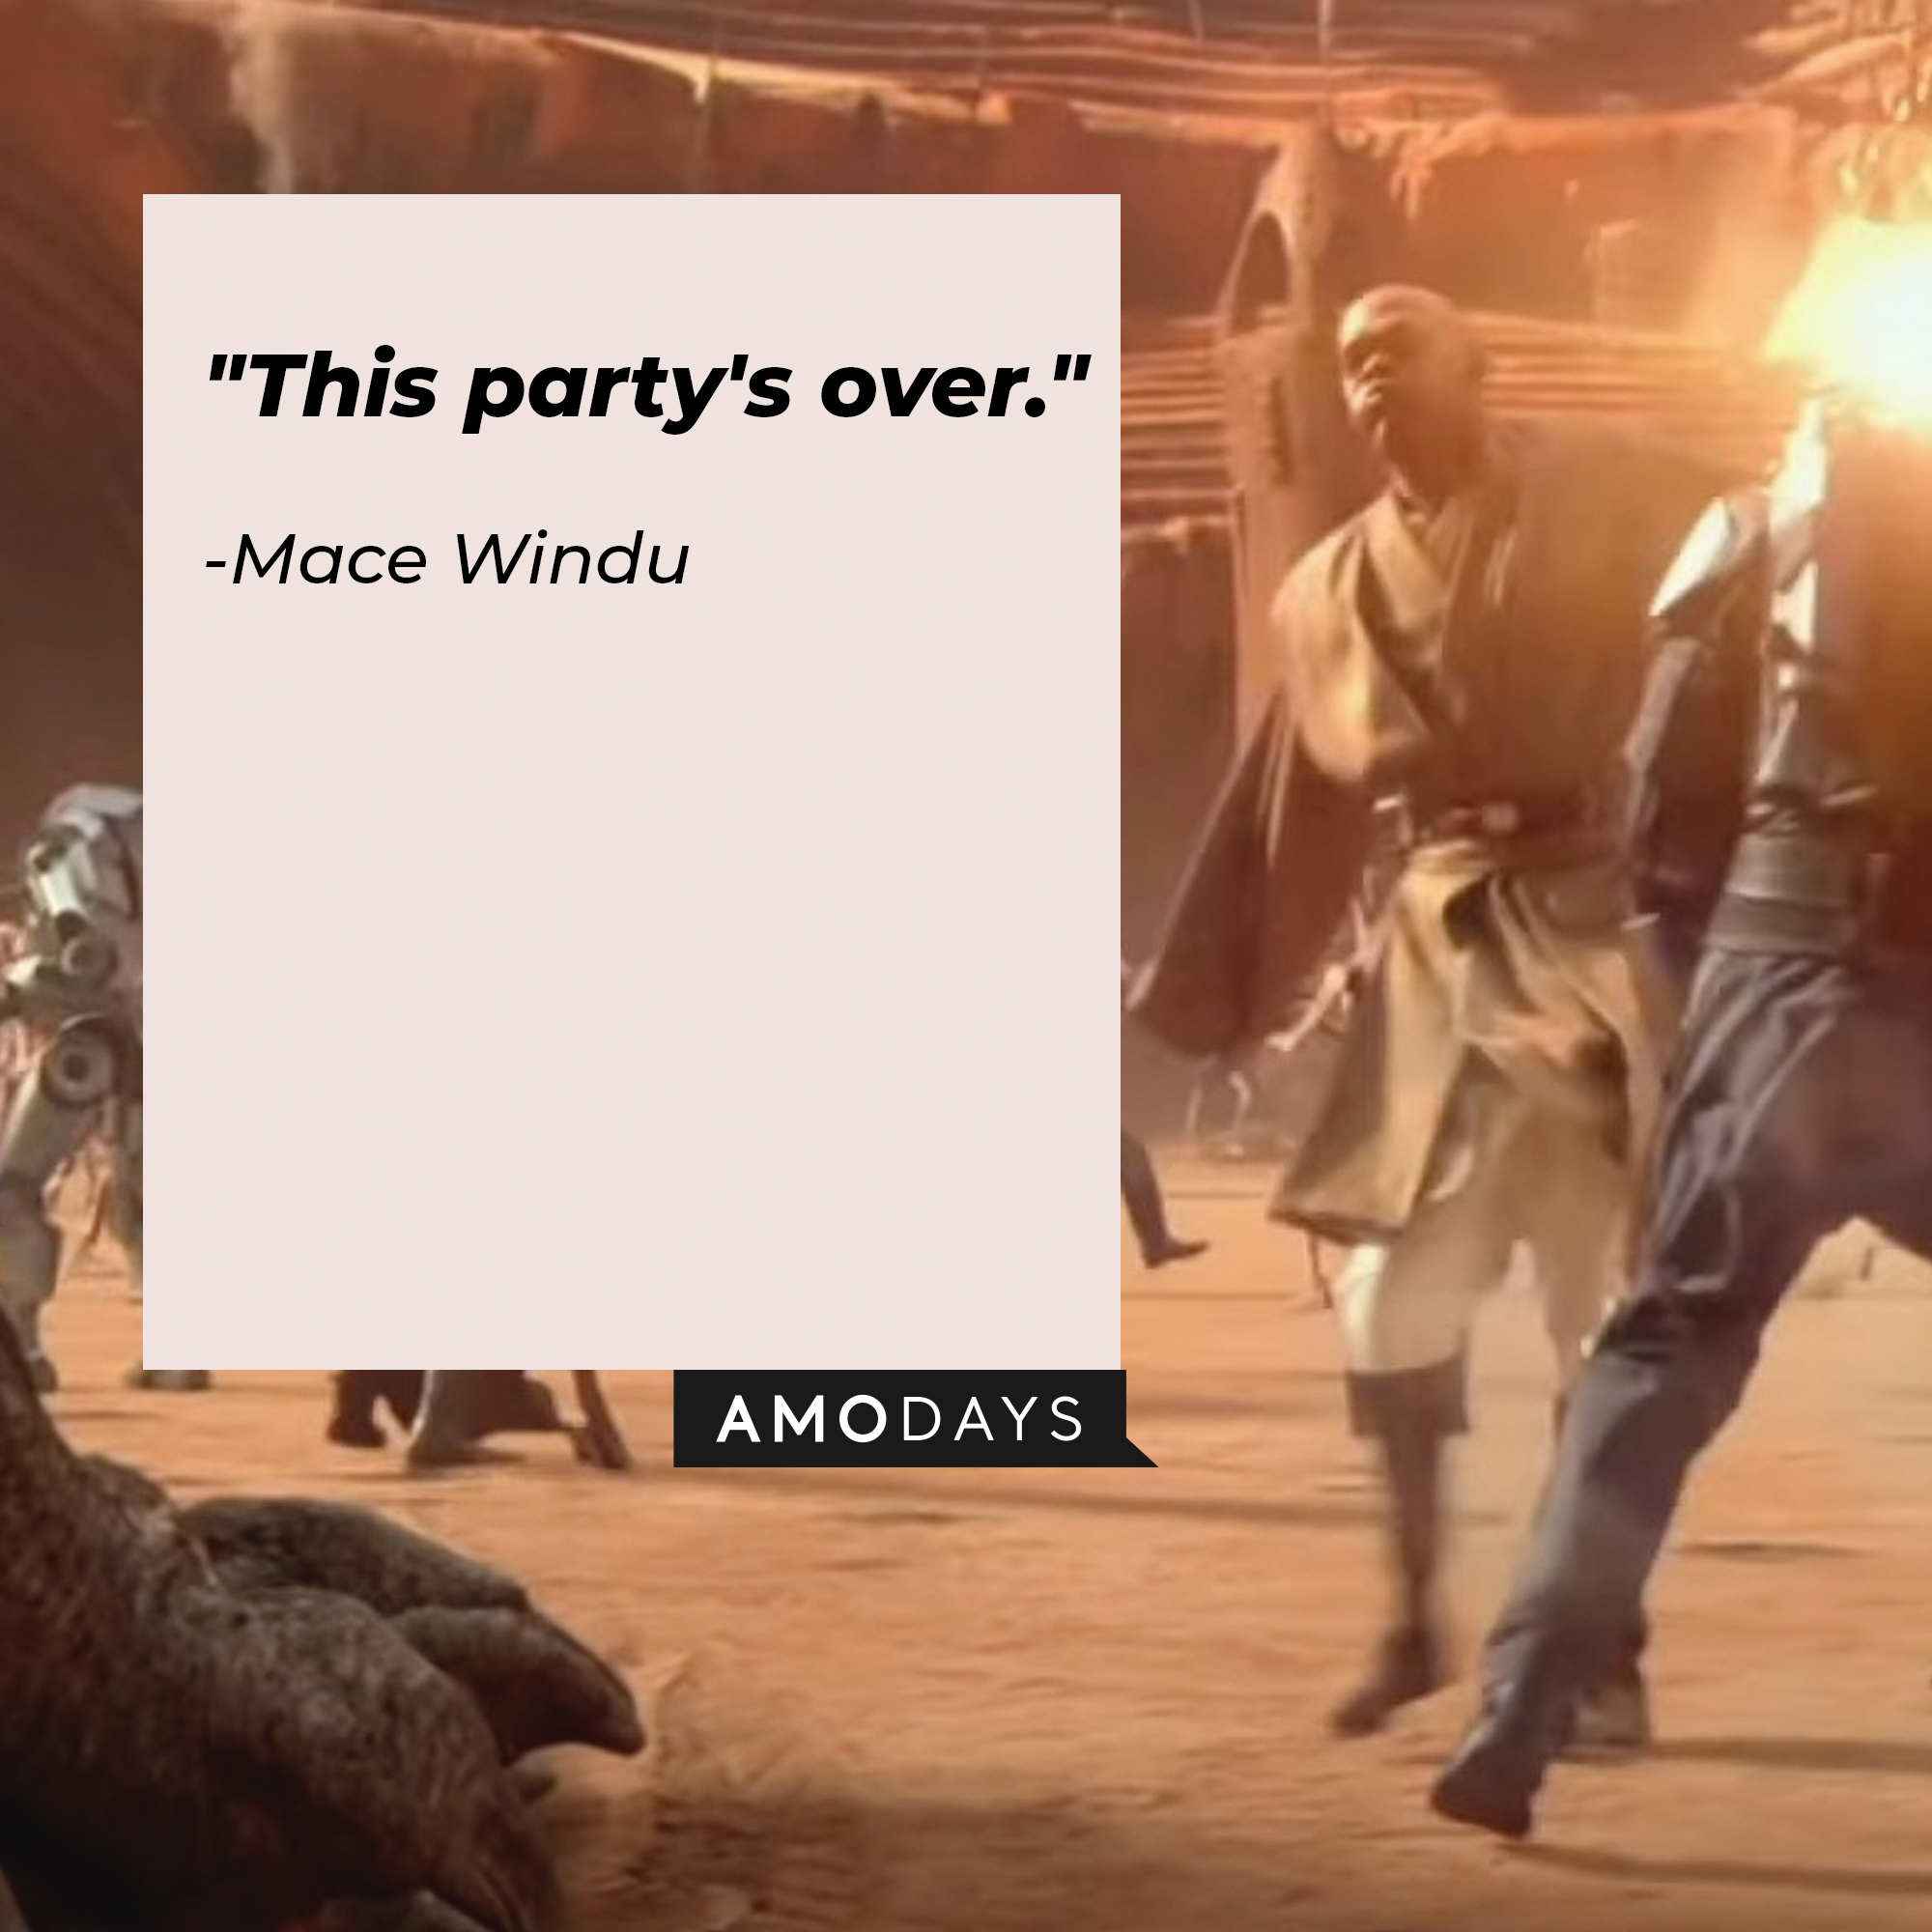 Mace Windu's quote: "This party's over." | Image: Facebook / StarWars.UK